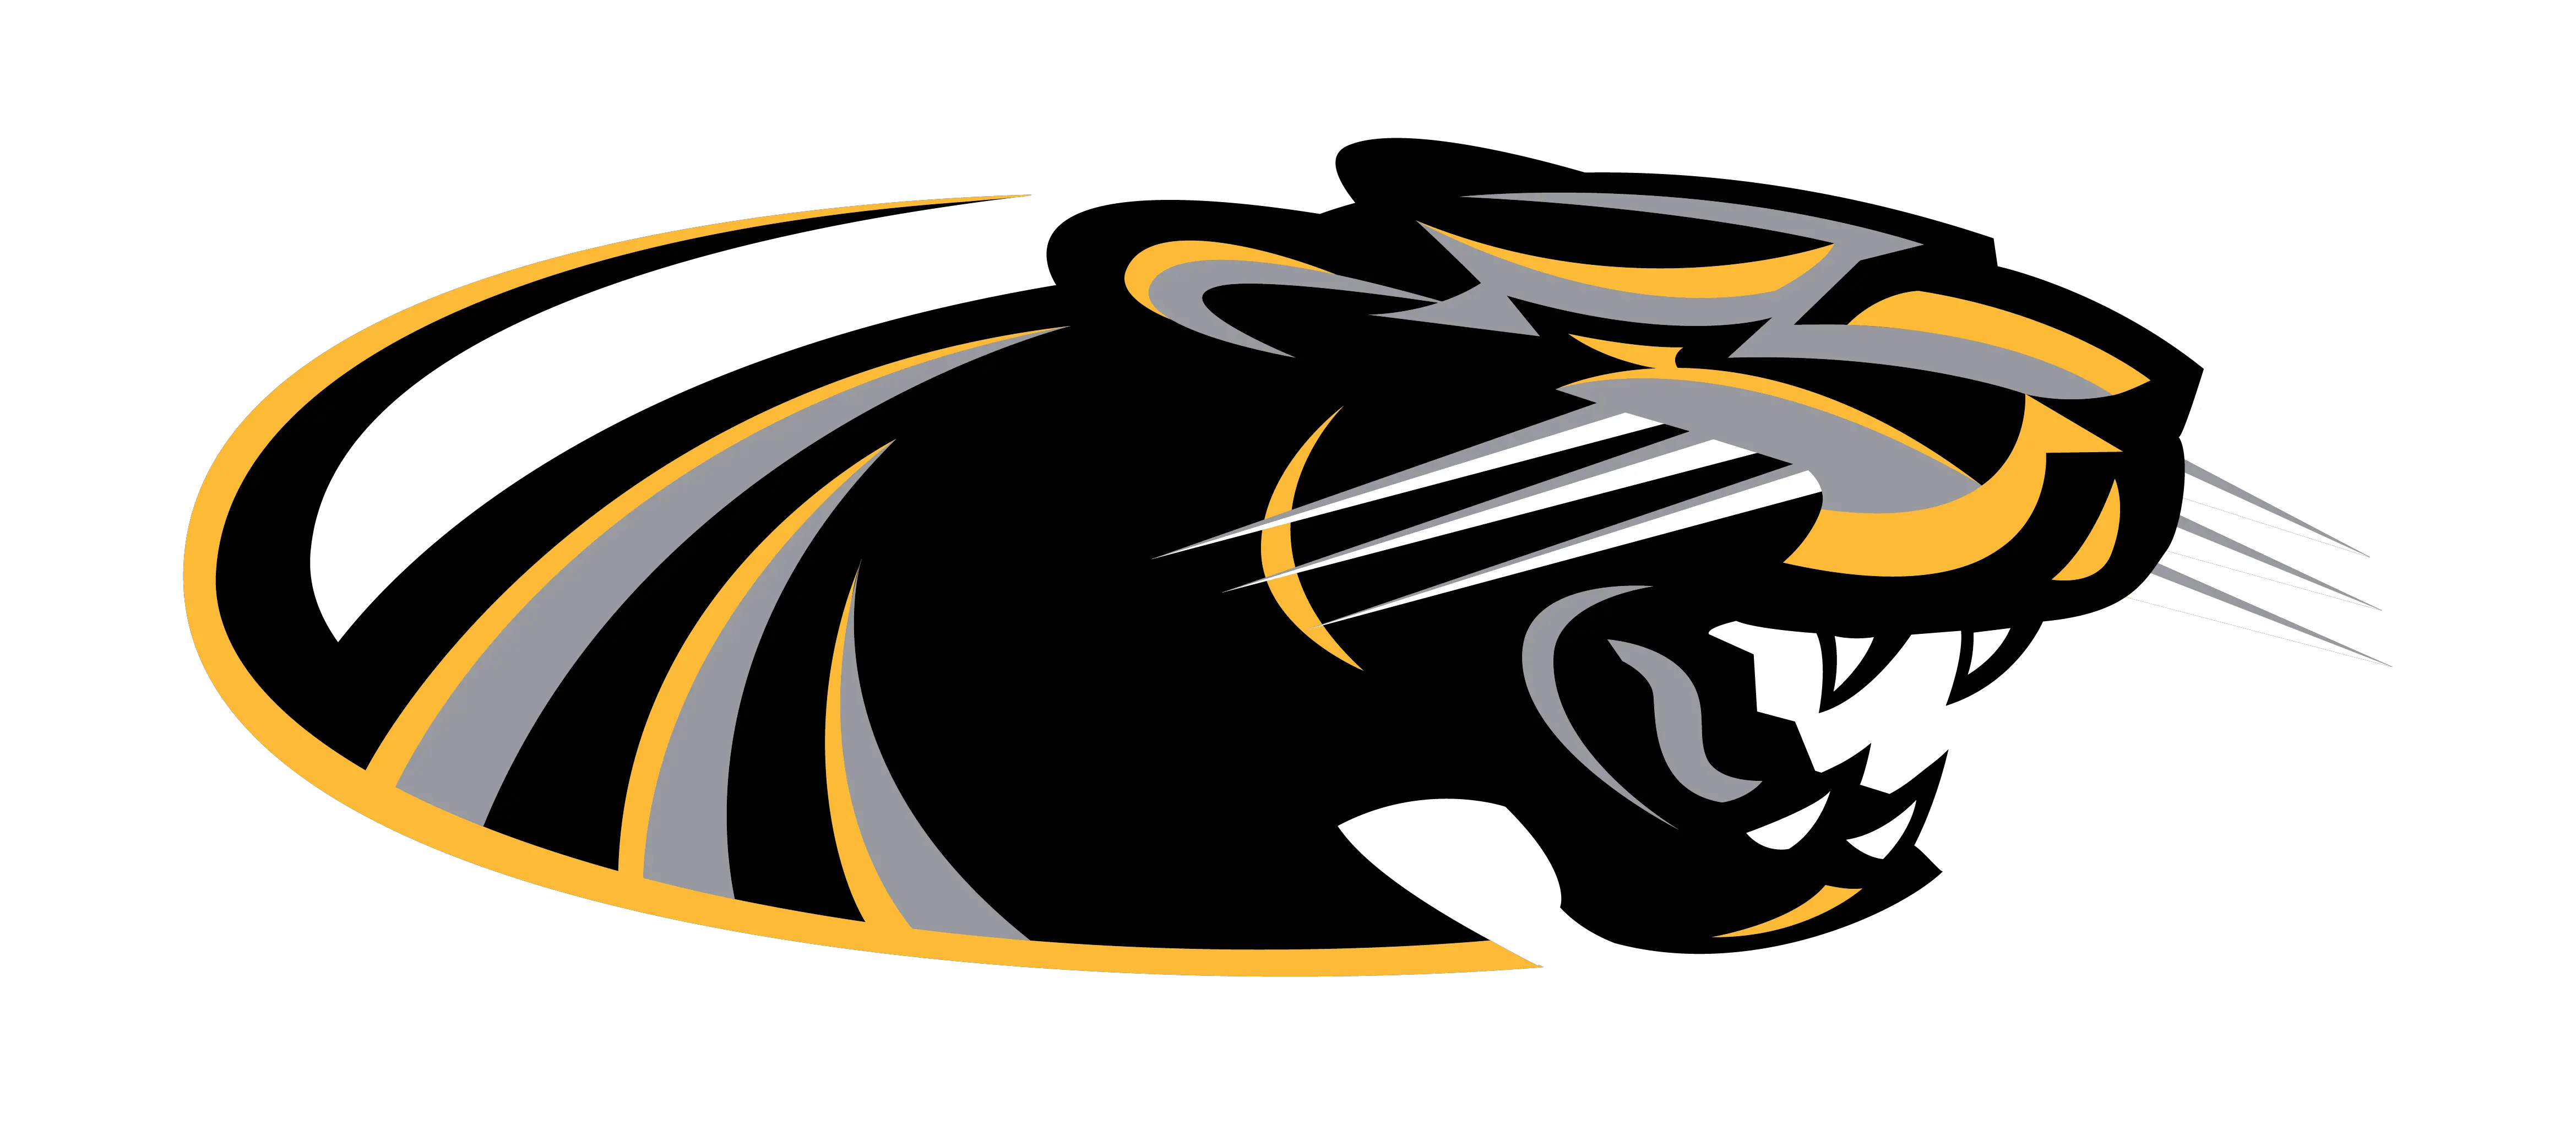 Download Hd Pioneer Panthers St Frances Academy Logo Plano East High School Mascot Png Panthers Png